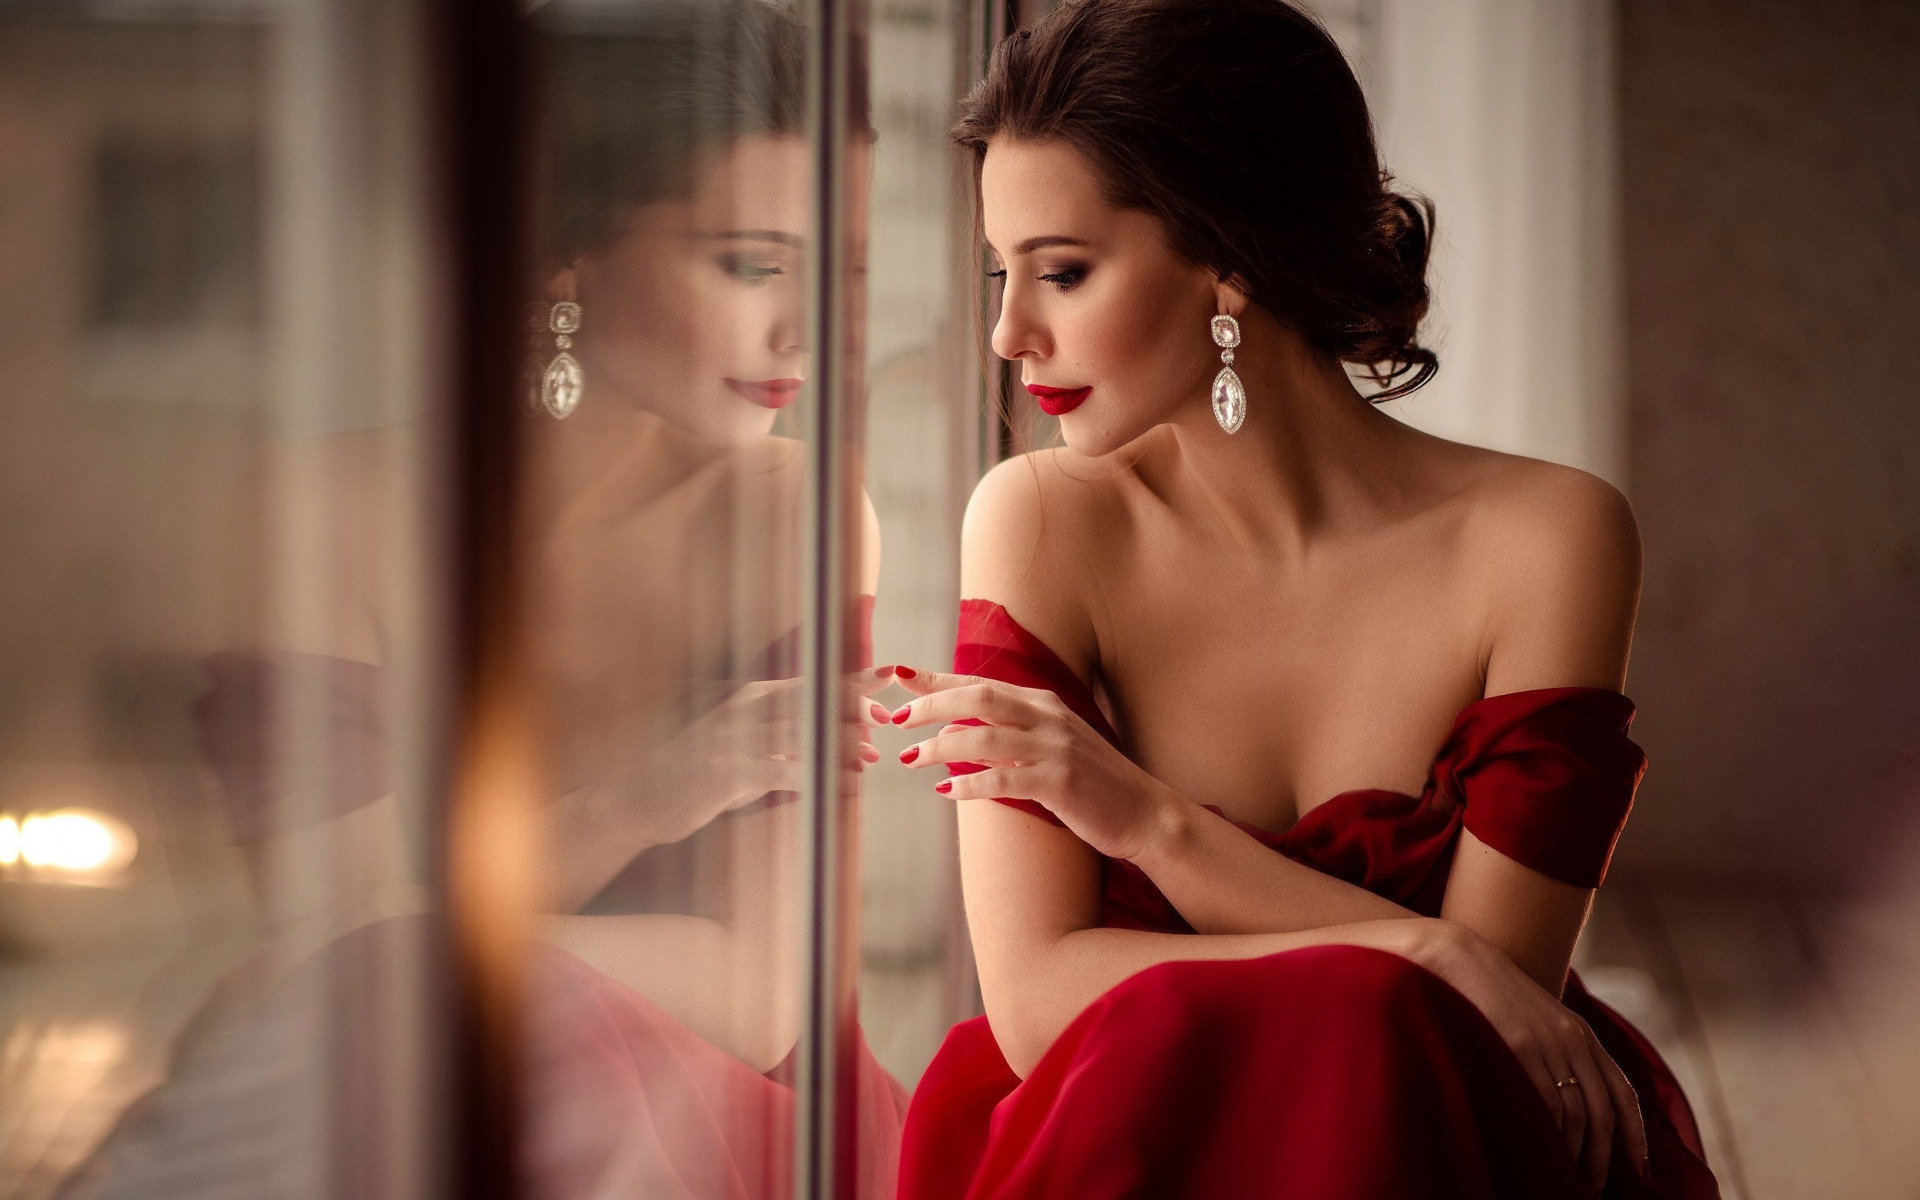 Brown Hair Earrings Hand Lipstick Makeup Red Dress Reflection Style 1920x1200